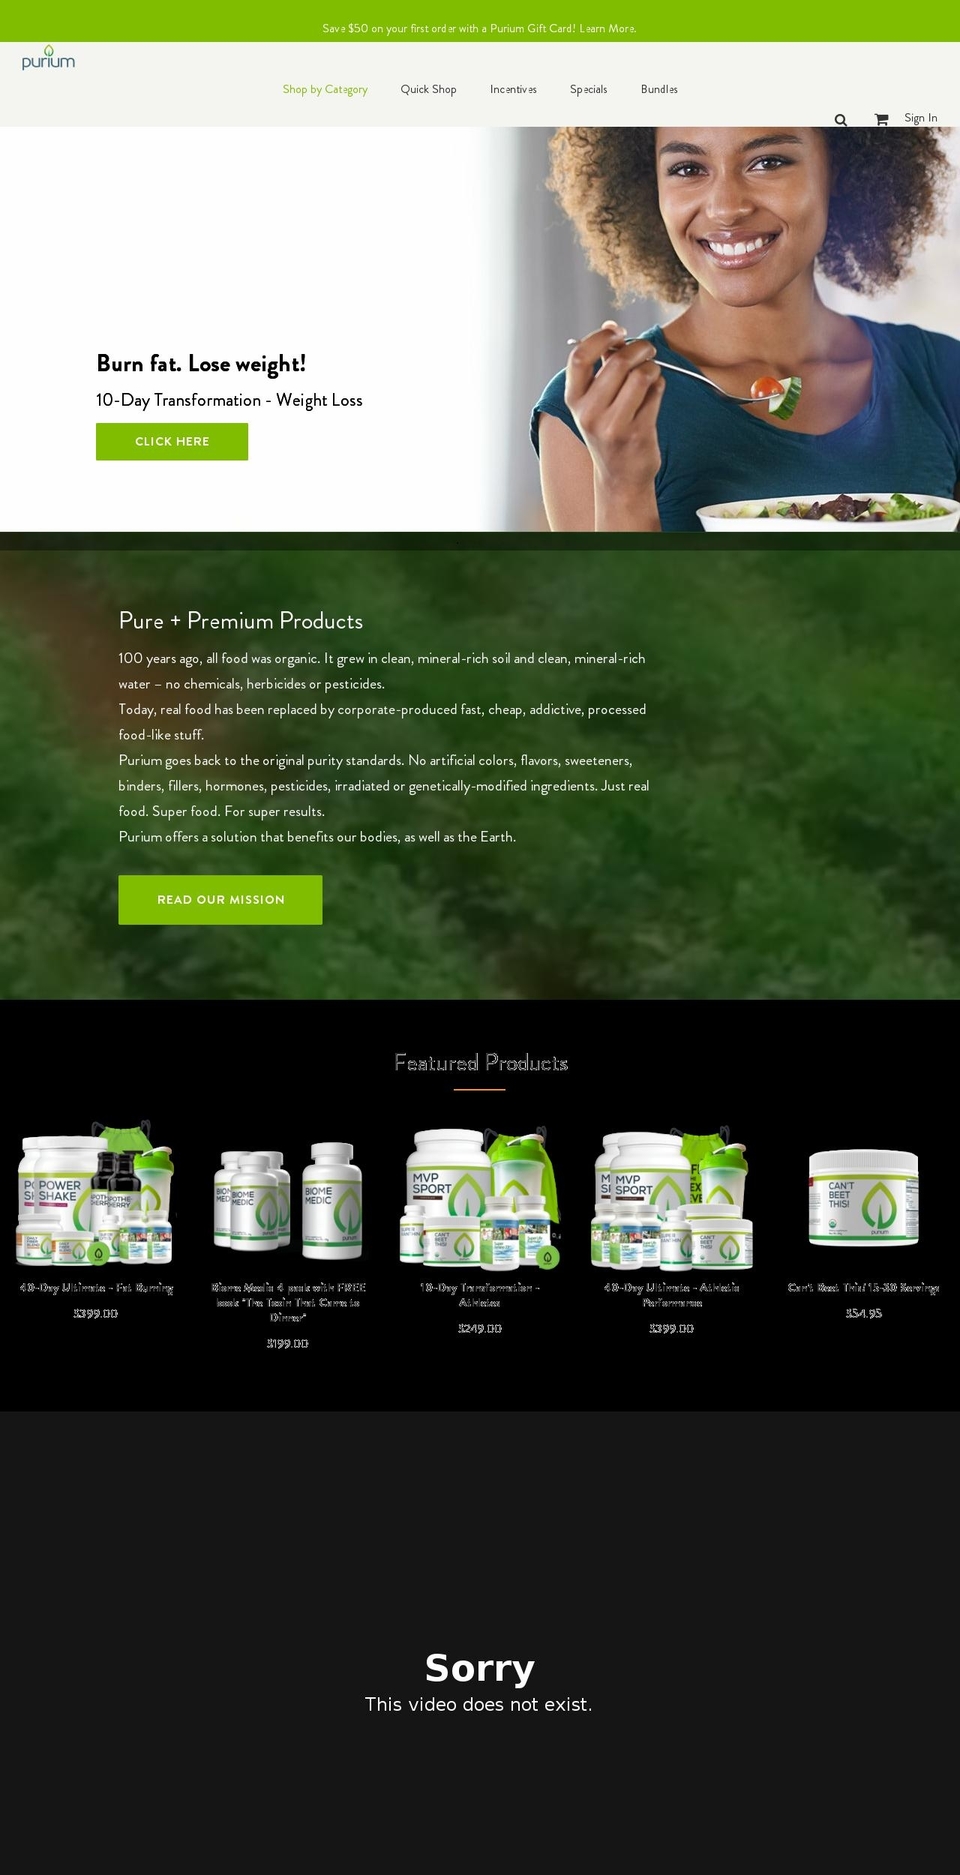 Production | BVA Shopify theme site example rightfoodforlife.com